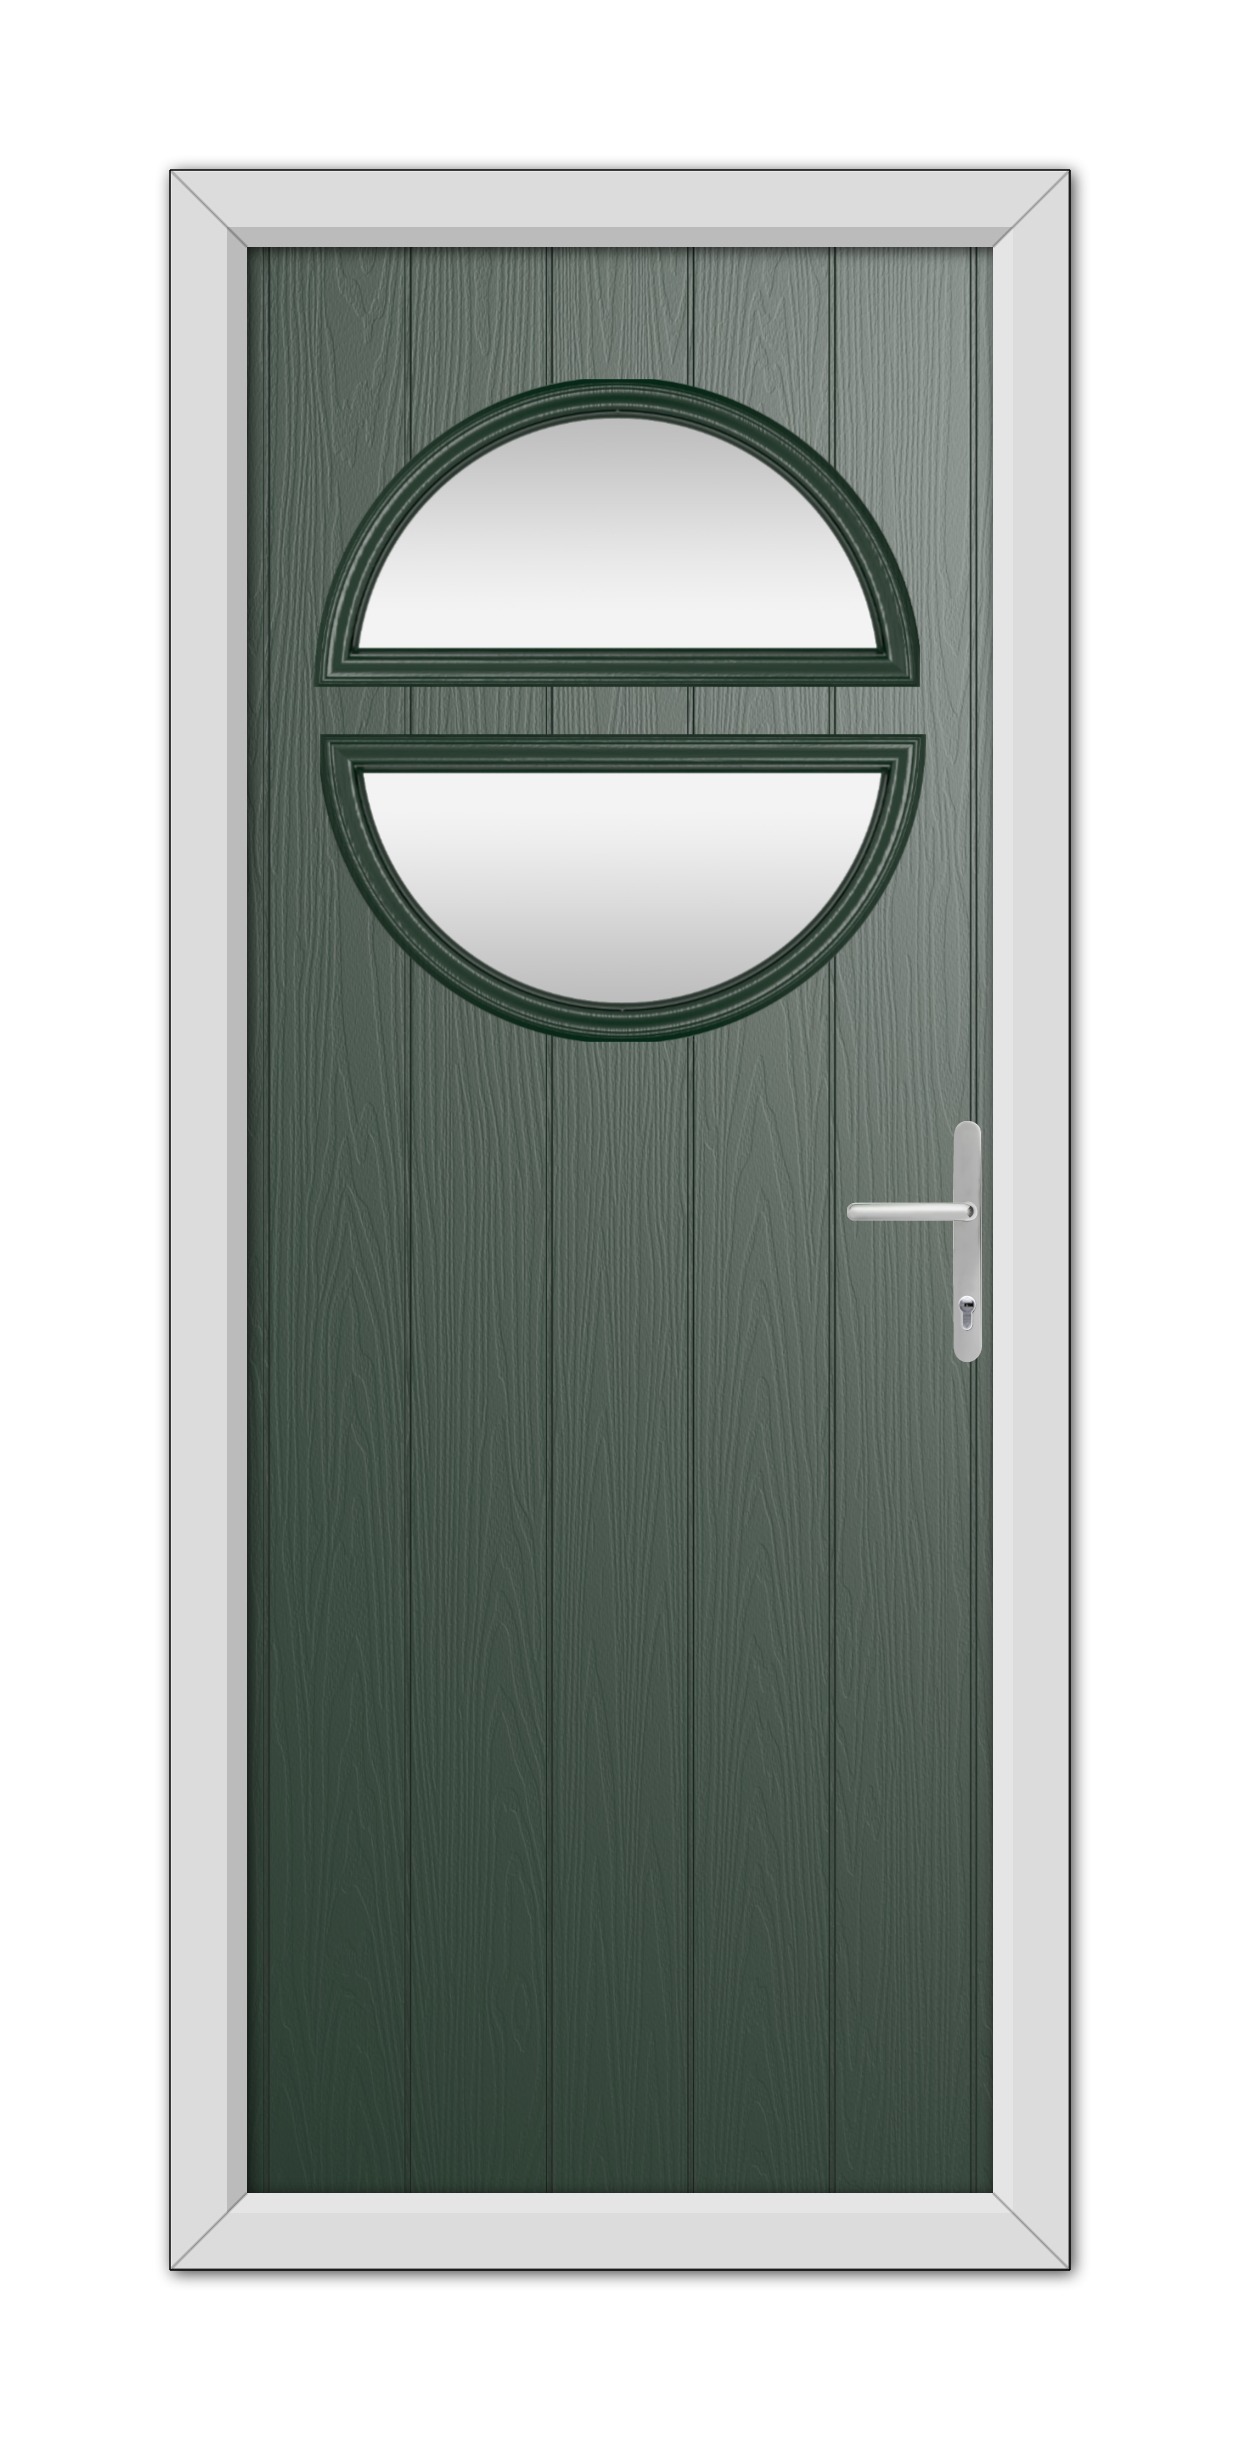 A modern Green Kent Composite Door 48mm Timber Core with an oval glass window and a metallic handle, set in a white frame.